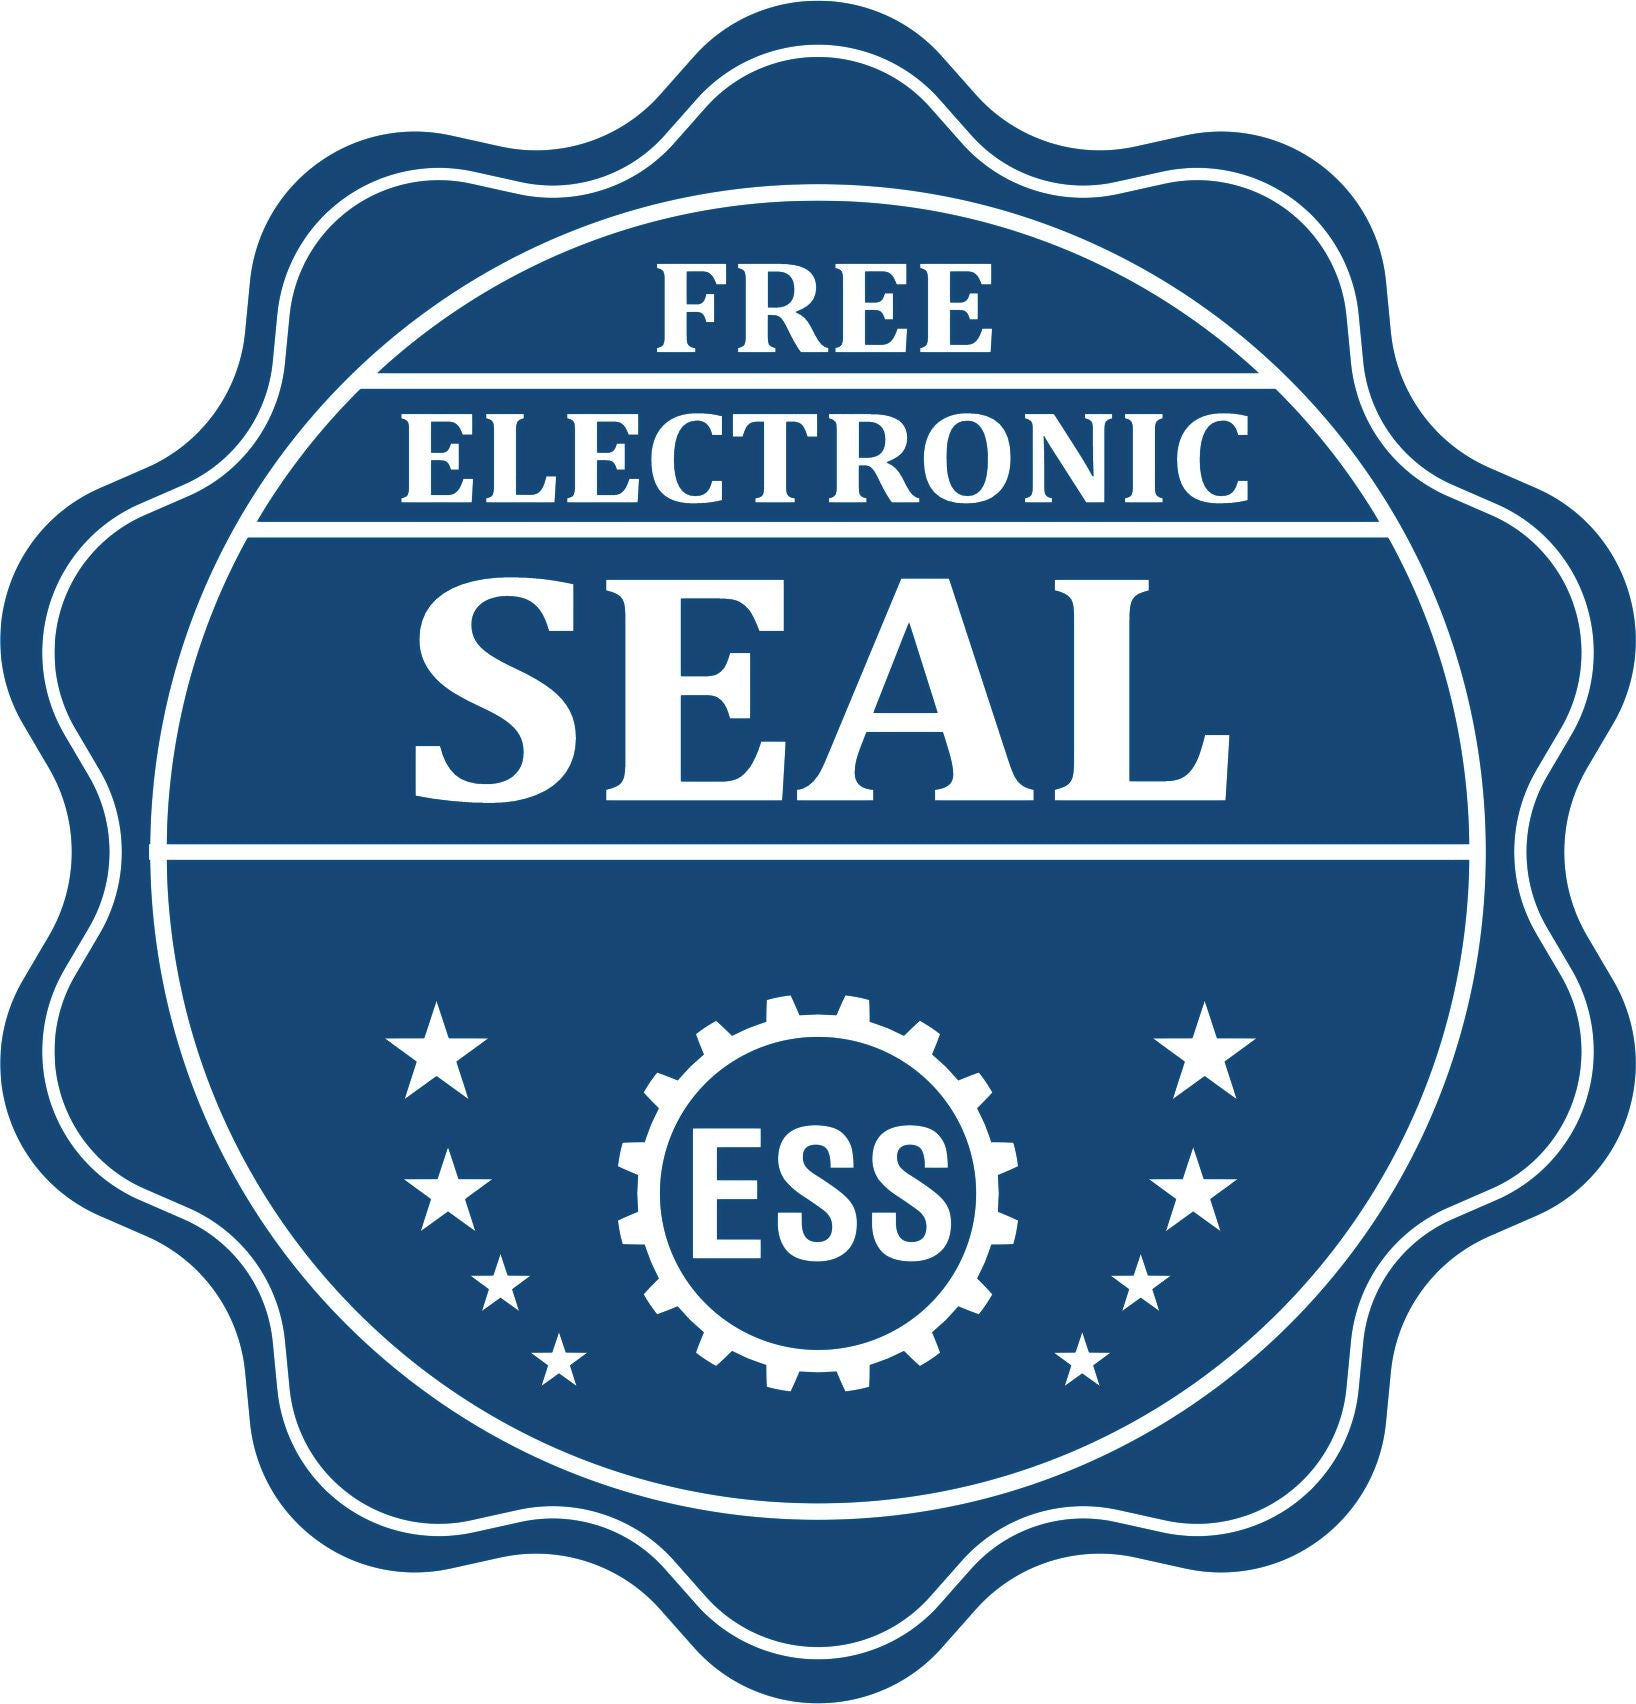 A badge showing a free electronic seal for the Nebraska Professional Engineer Seal Stamp with stars and the ESS gear on the emblem.